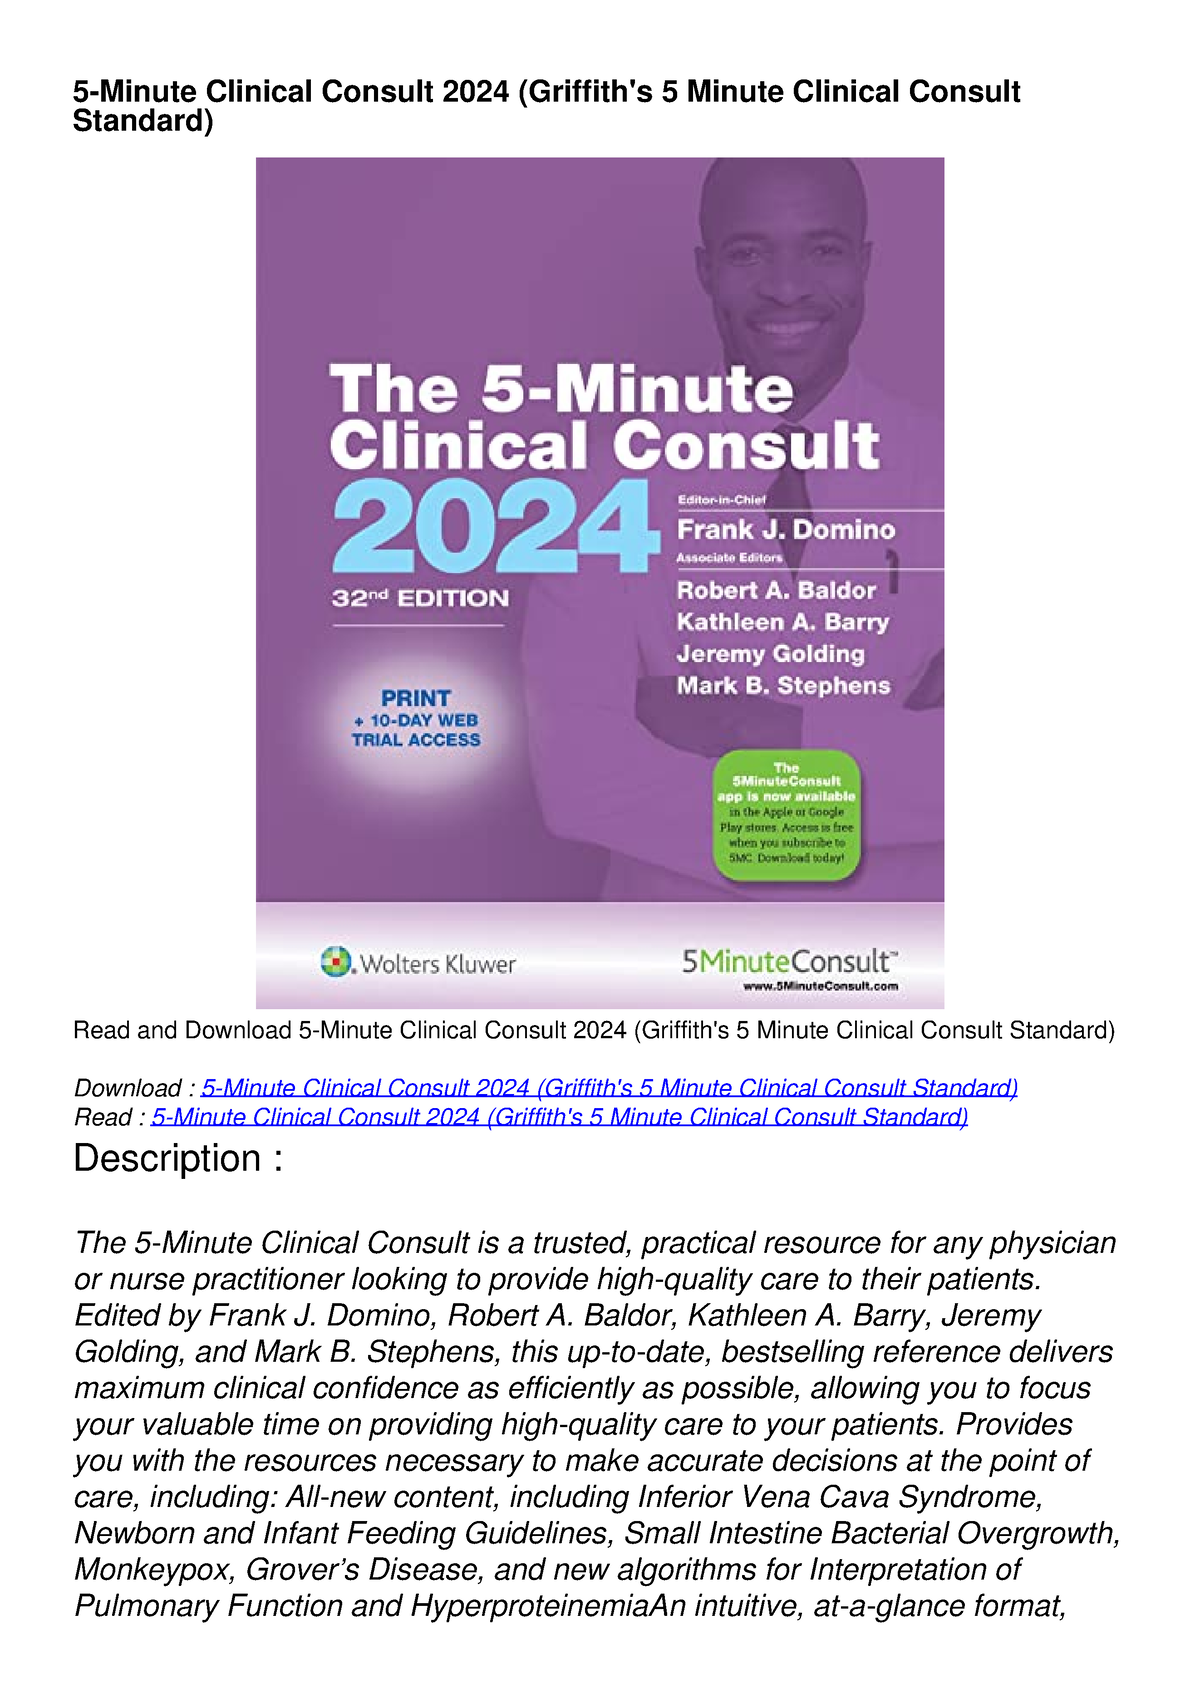 [PDF READ ONLINE] 5Minute Clinical Consult 2024 (Griffith's 5 Minute Clinical Consult Standard